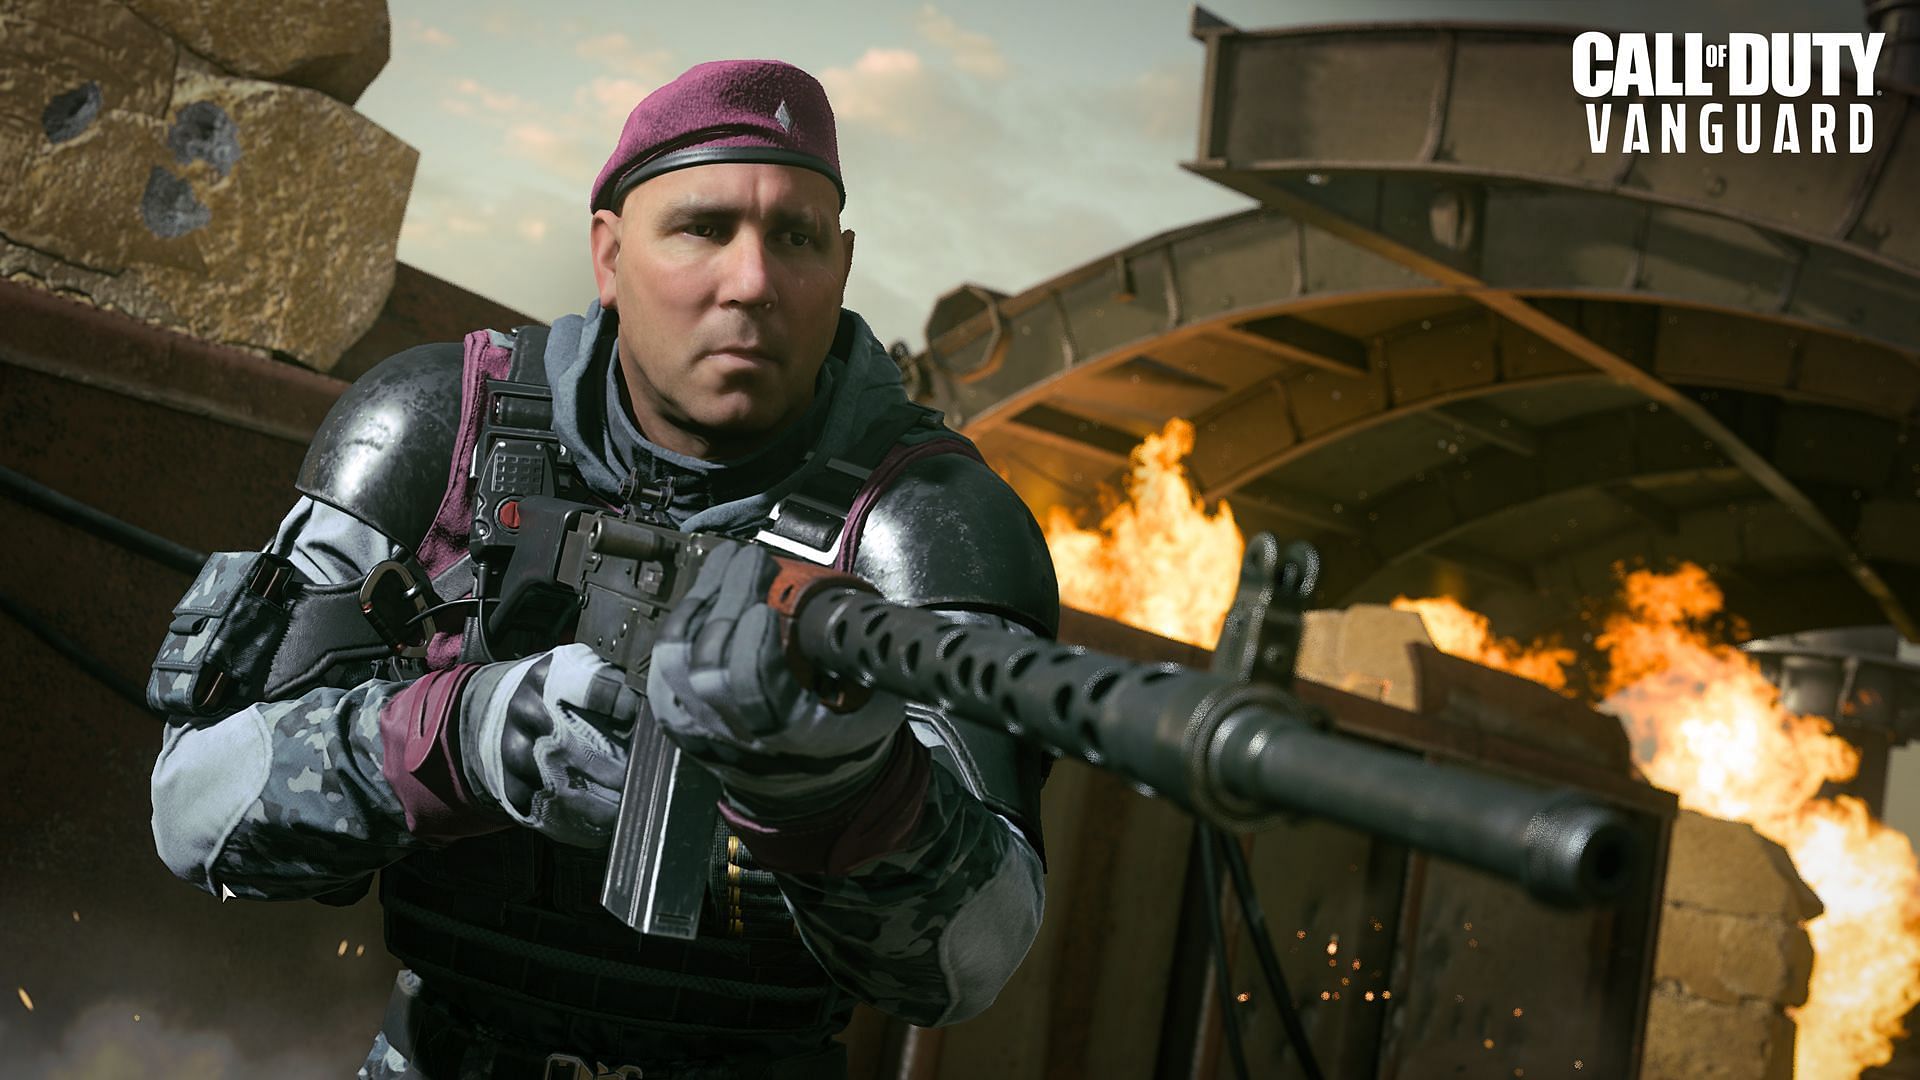 Gabriel T. Rorke with the Lienna 57 LMG (Image via Activision)